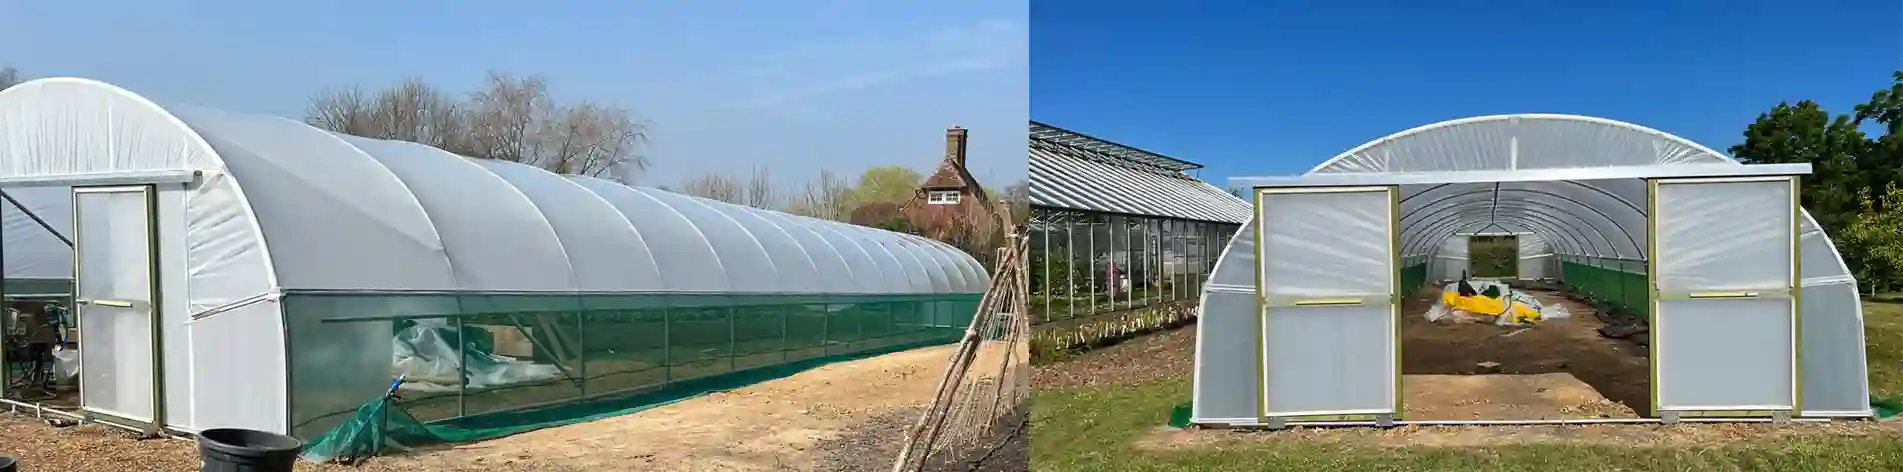 polytunnels-covers